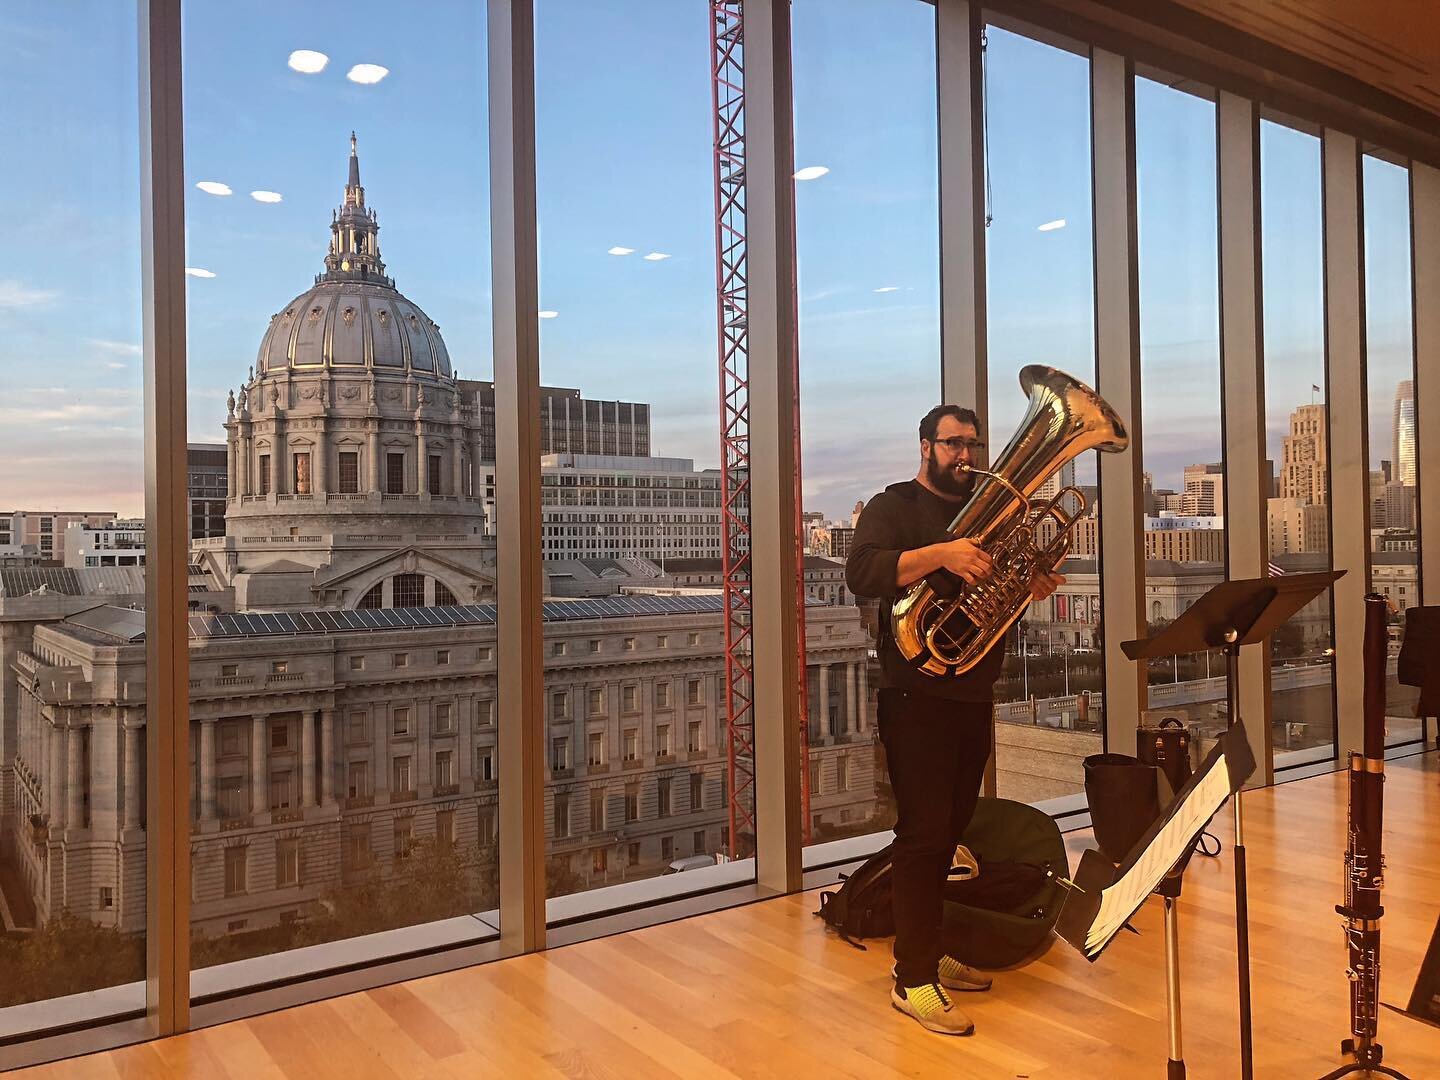 Music with a view! Looking forward to two shows at the @sfconservmusic with @nomad.session and @brassoverbridges in the next two weeks. 

Brass Over Bridges W/ SFCM Wind Ensemble
New music by @melodiclife featuring animation and art by @eduardocalz08